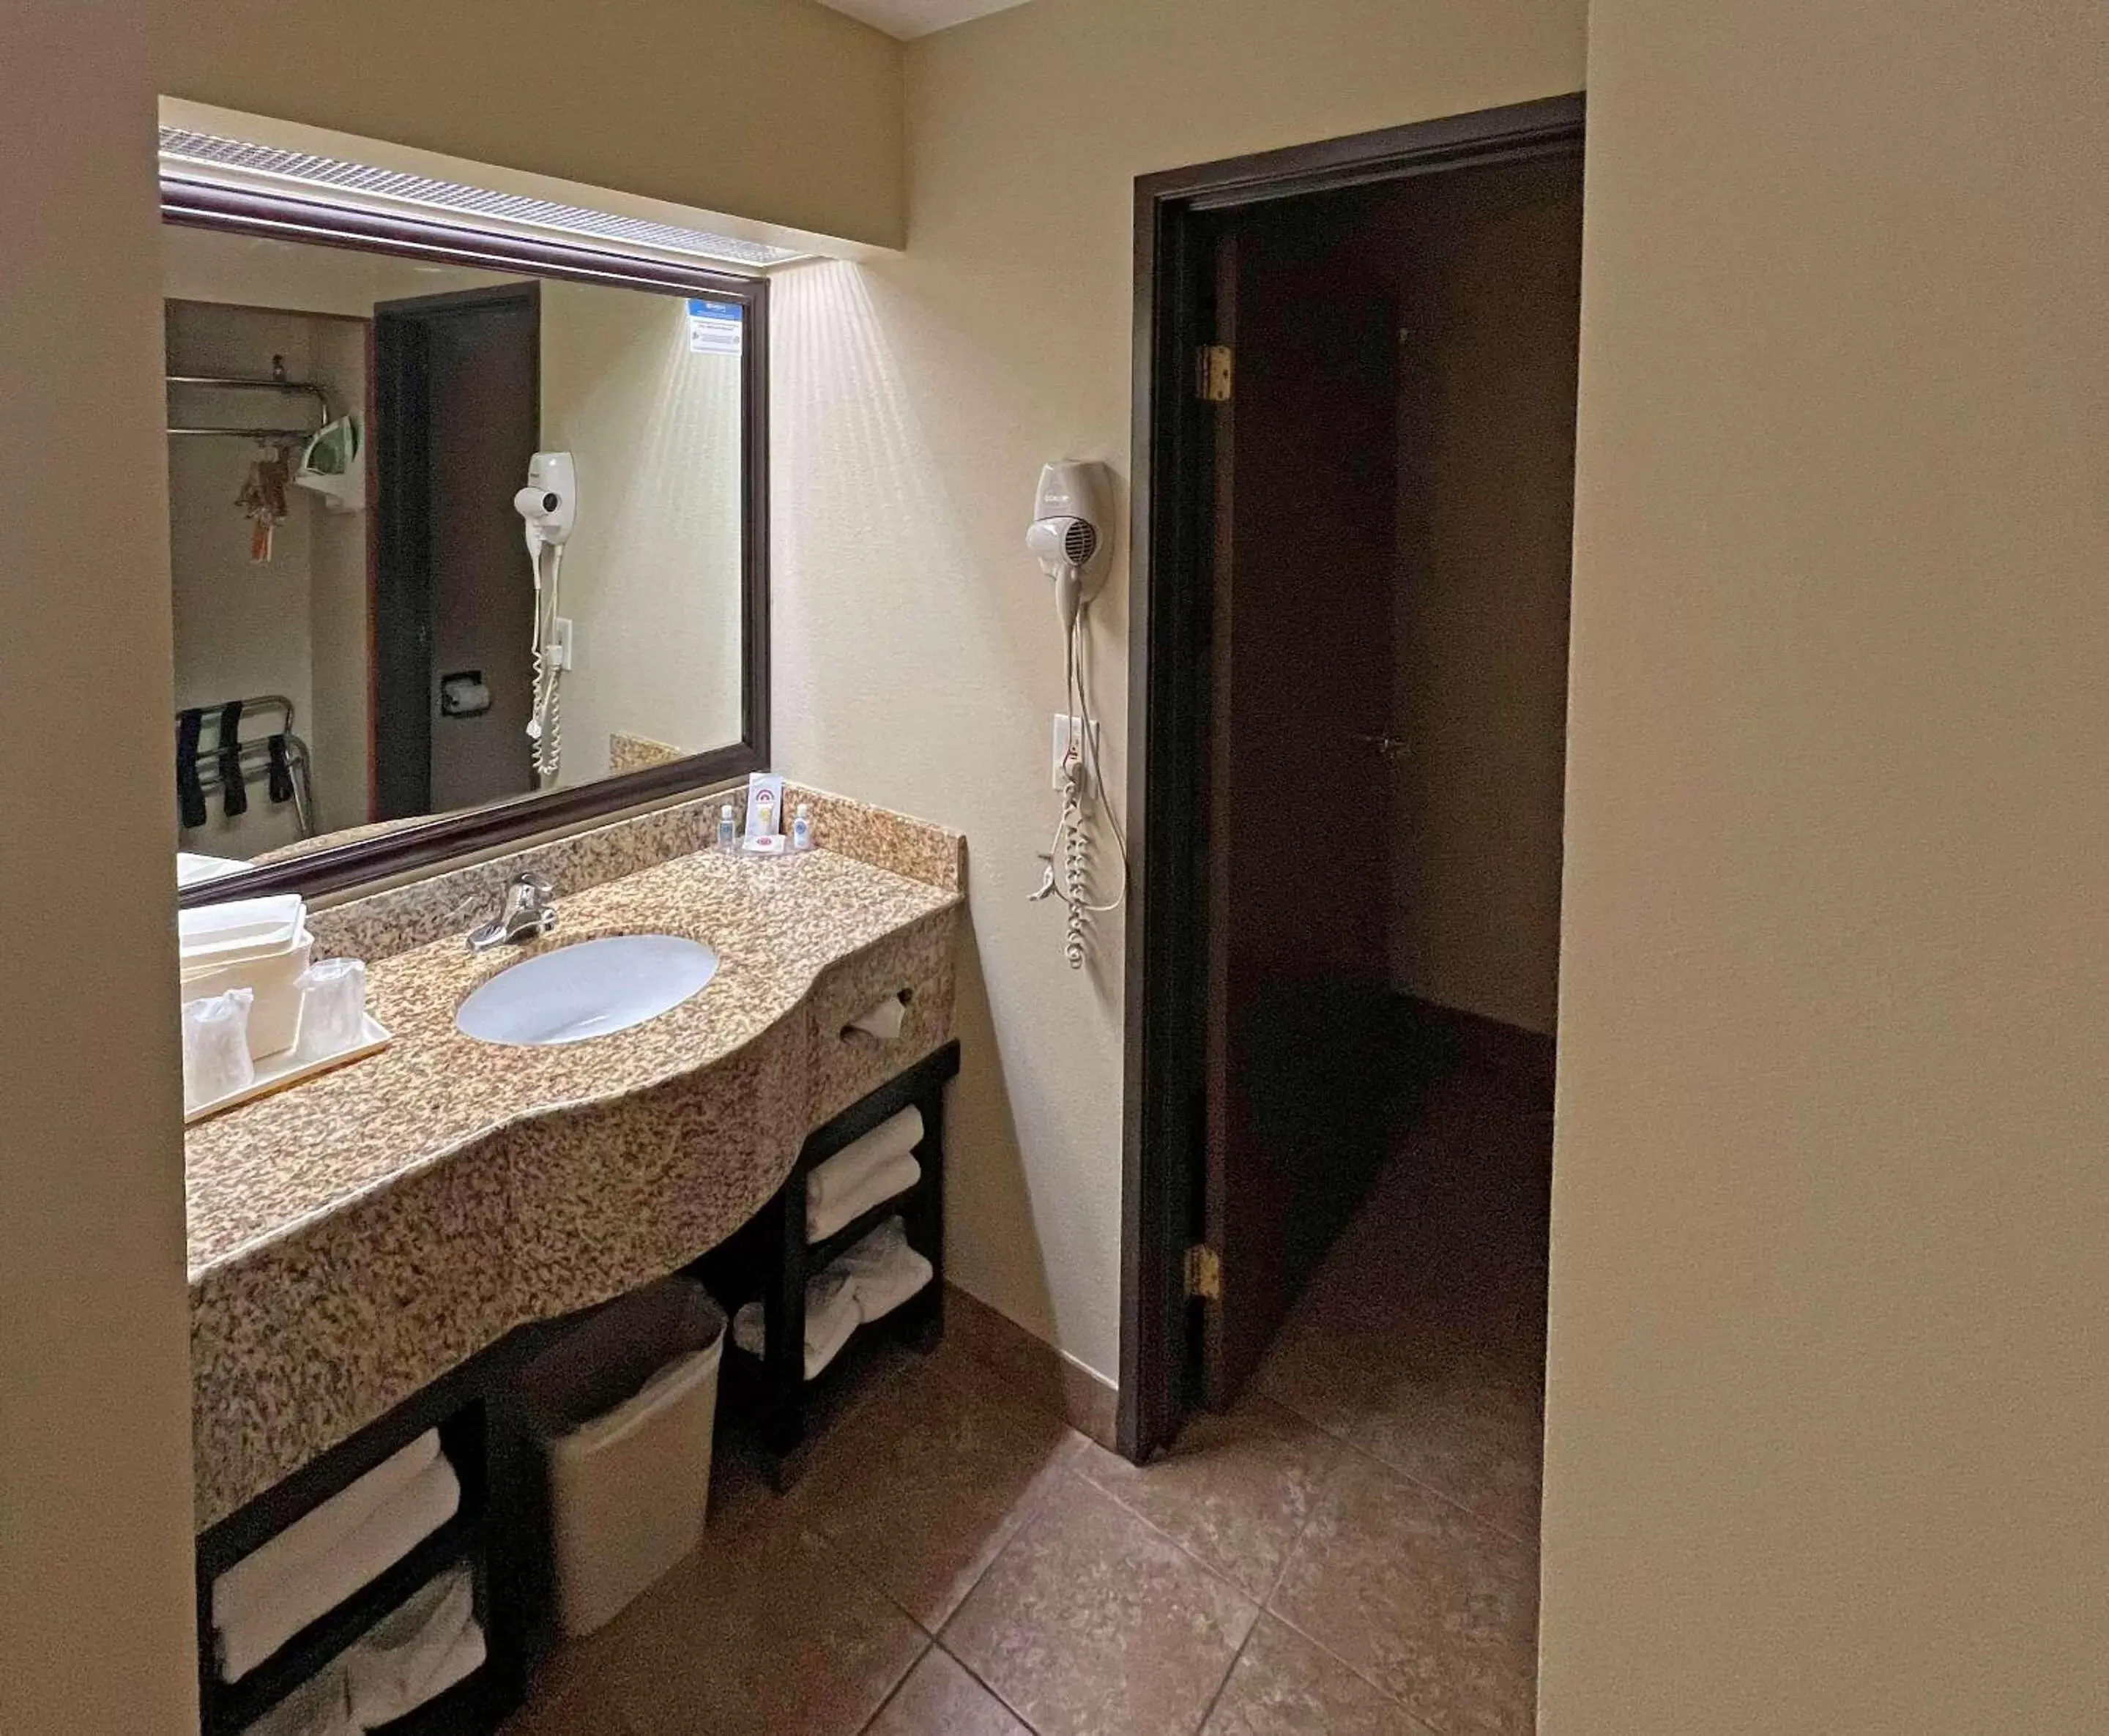 Bathroom in Comfort Inn West Phoenix at 27th Ave and I-I0